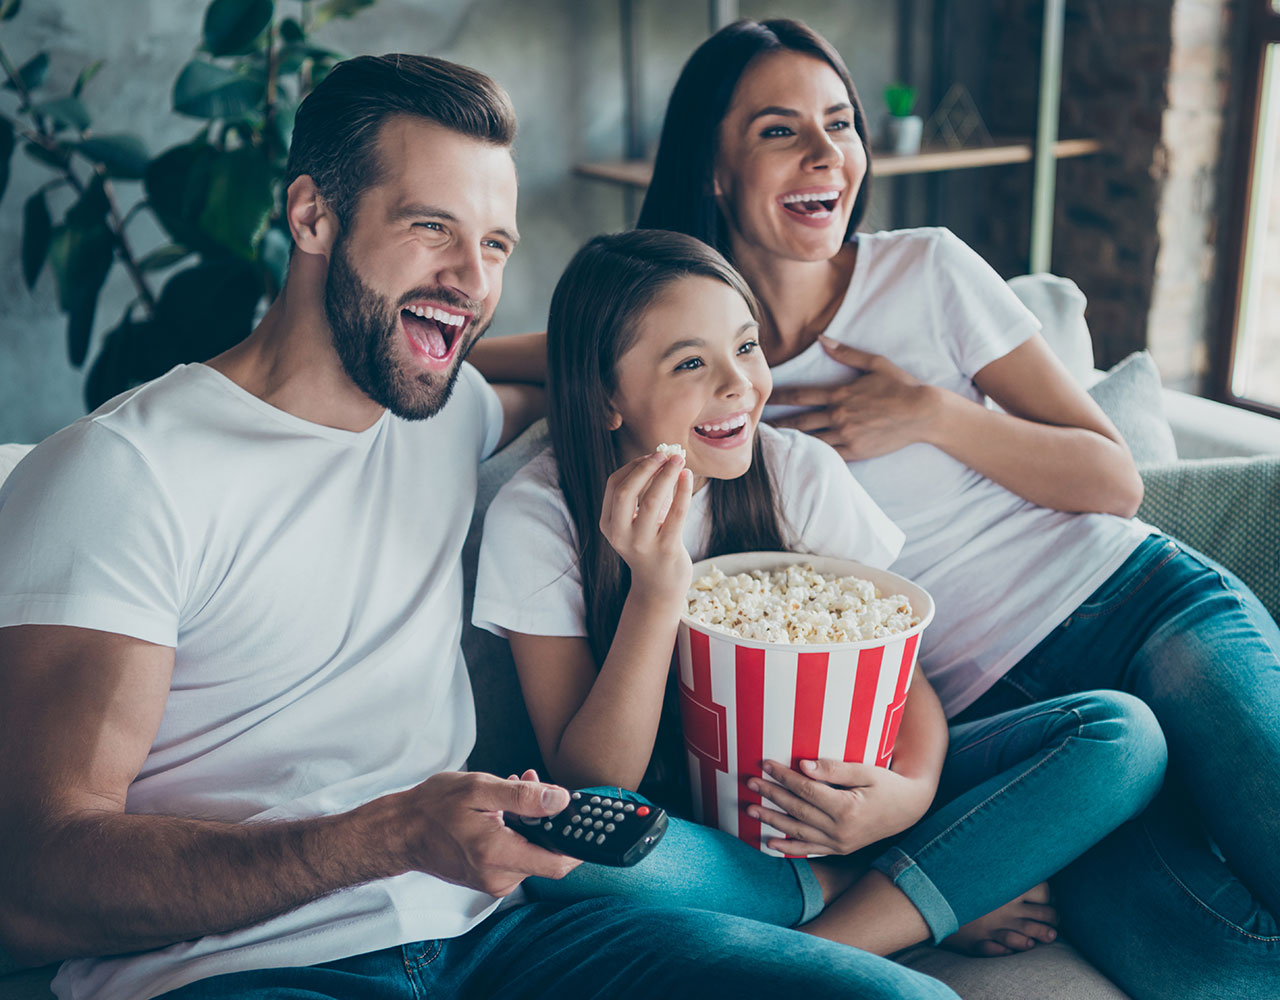 From dramas and comedies to romantic movies and documentaries, there's plenty of UP Faith & Family programs you can enjoy together.